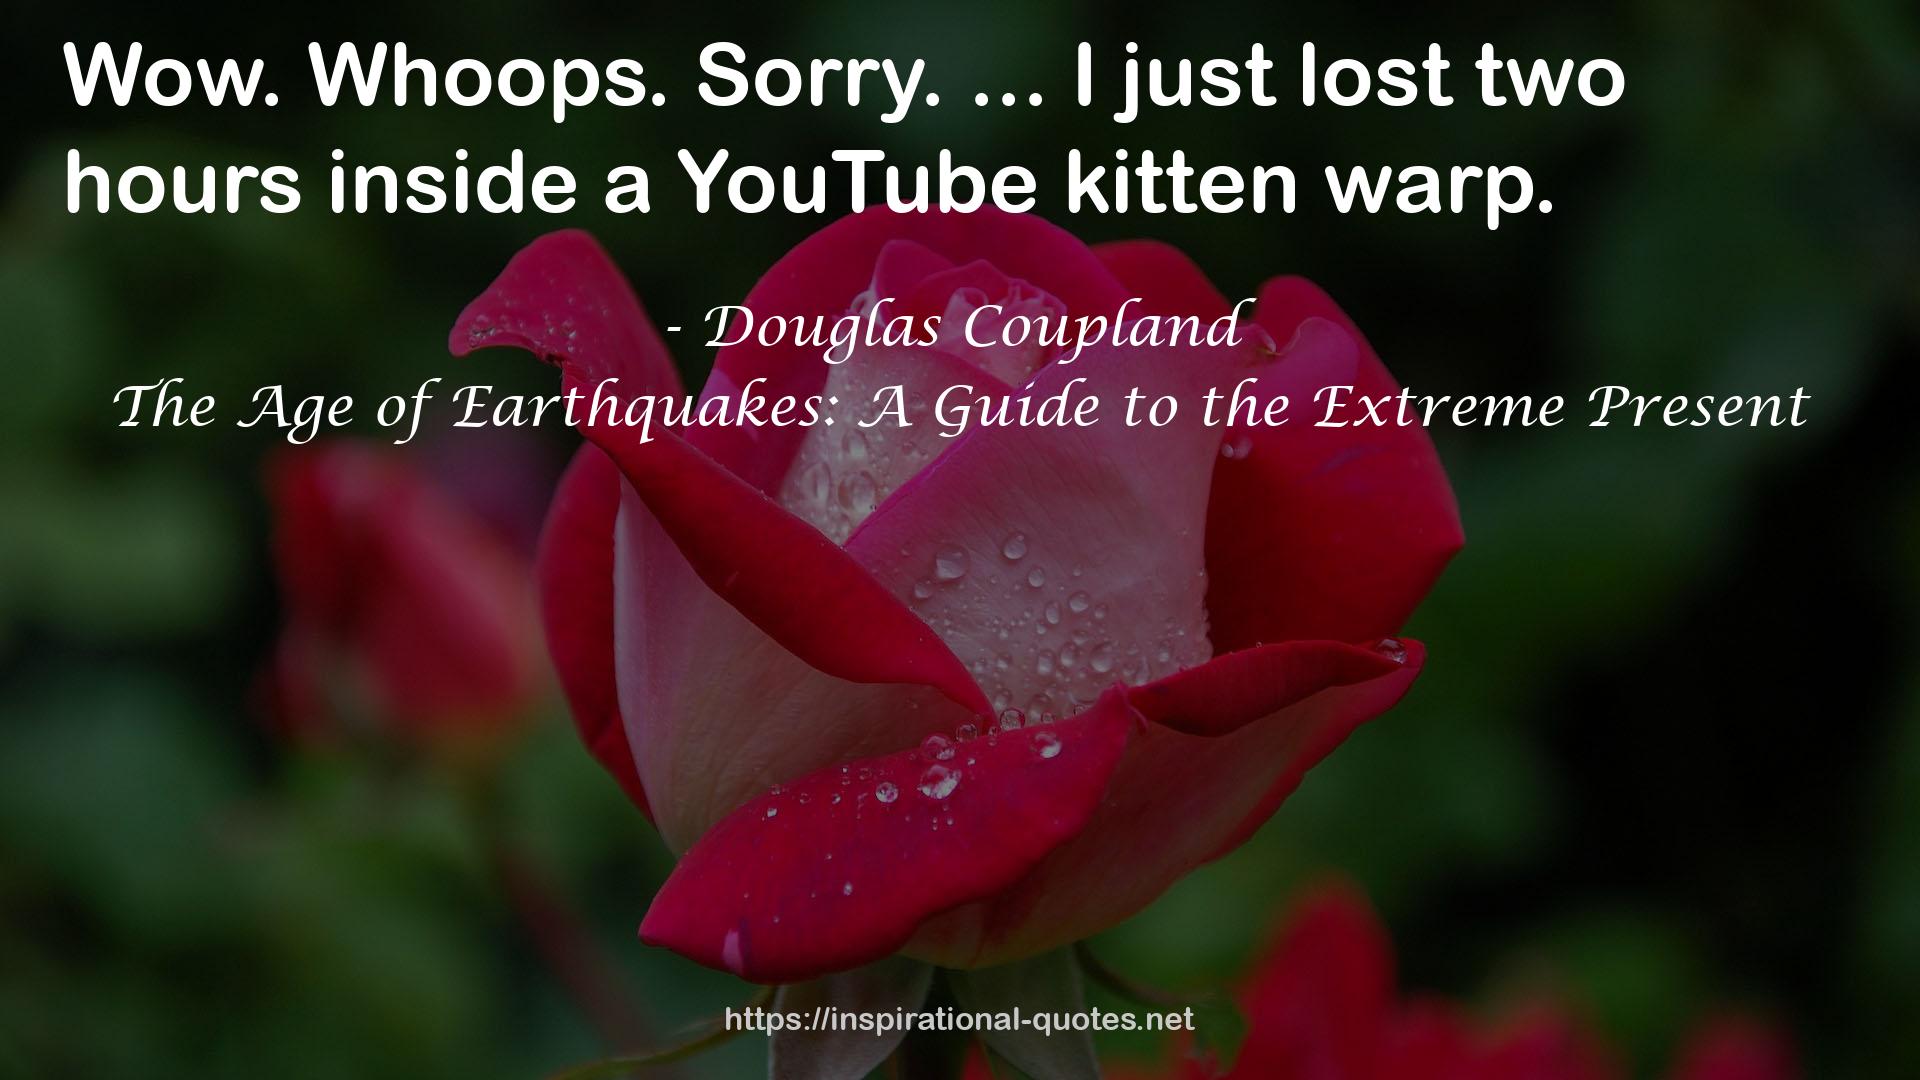 a YouTube kitten  QUOTES